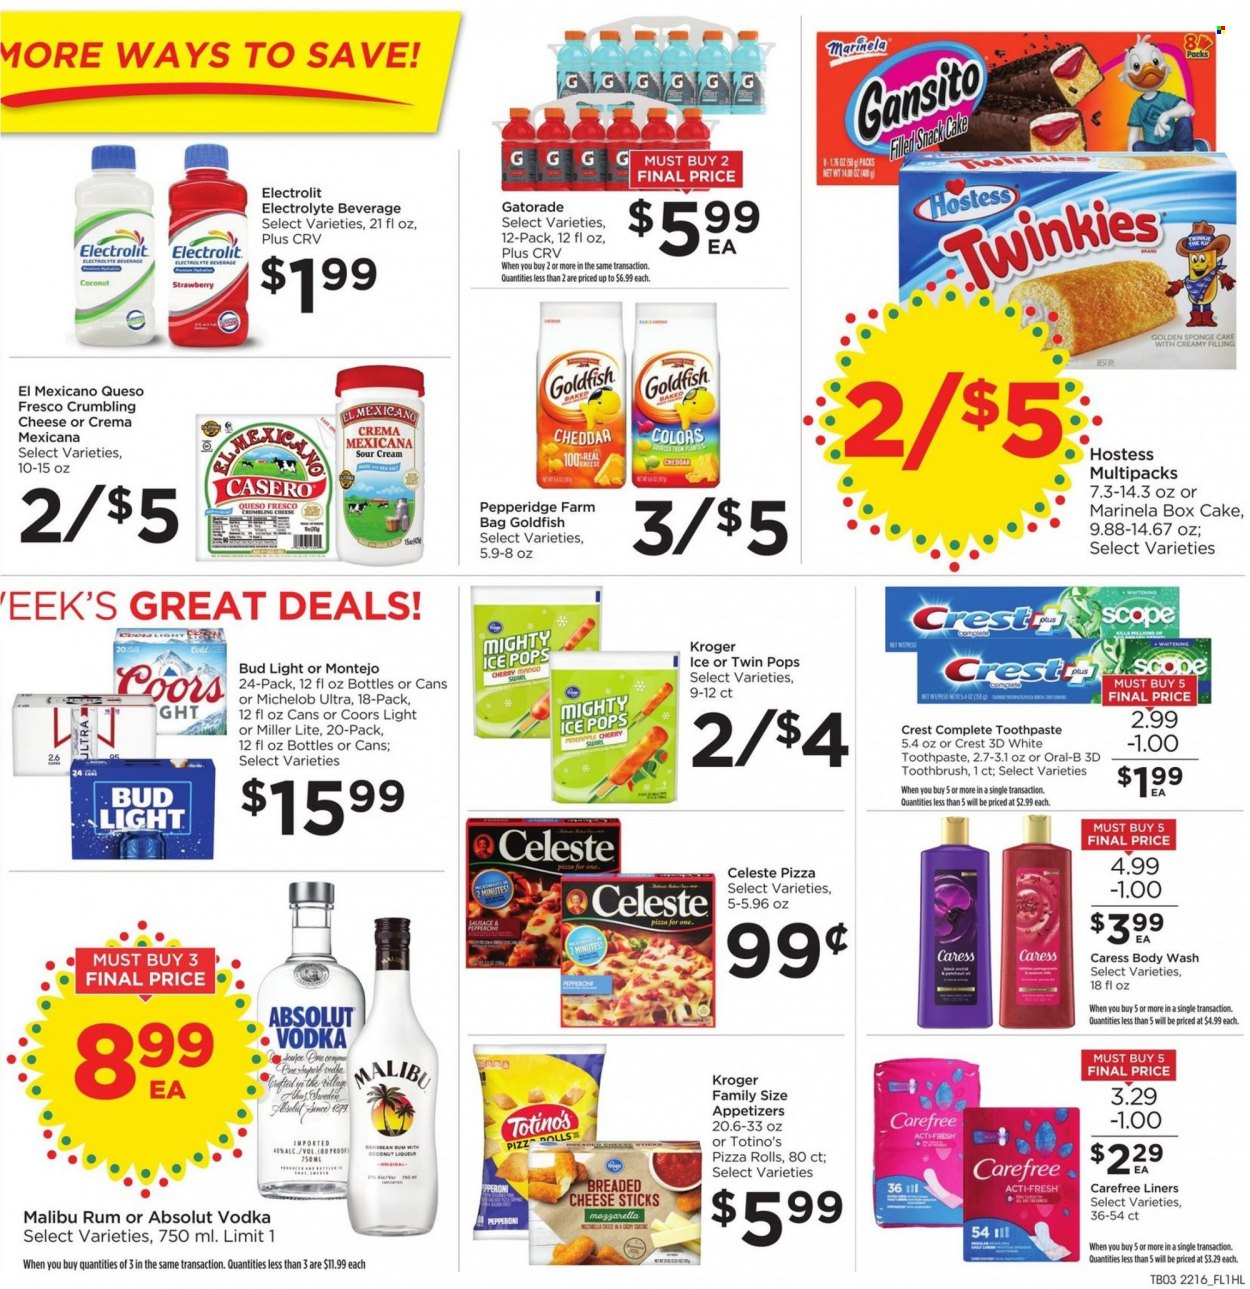 thumbnail - Food 4 Less Flyer - 05/18/2022 - 05/24/2022 - Sales products - cake, pizza rolls, sponge cake, pineapple, cherries, coconut, pizza, sausage, pepperoni, queso fresco, sour cream, cheese sticks, Celeste, Goldfish, Gatorade, red wine, wine, rum, vodka, Absolut, Malibu, beer, Bud Light, body wash, toothbrush, Oral-B, toothpaste, Crest, Carefree, bag, Miller Lite, Coors, Michelob. Page 5.